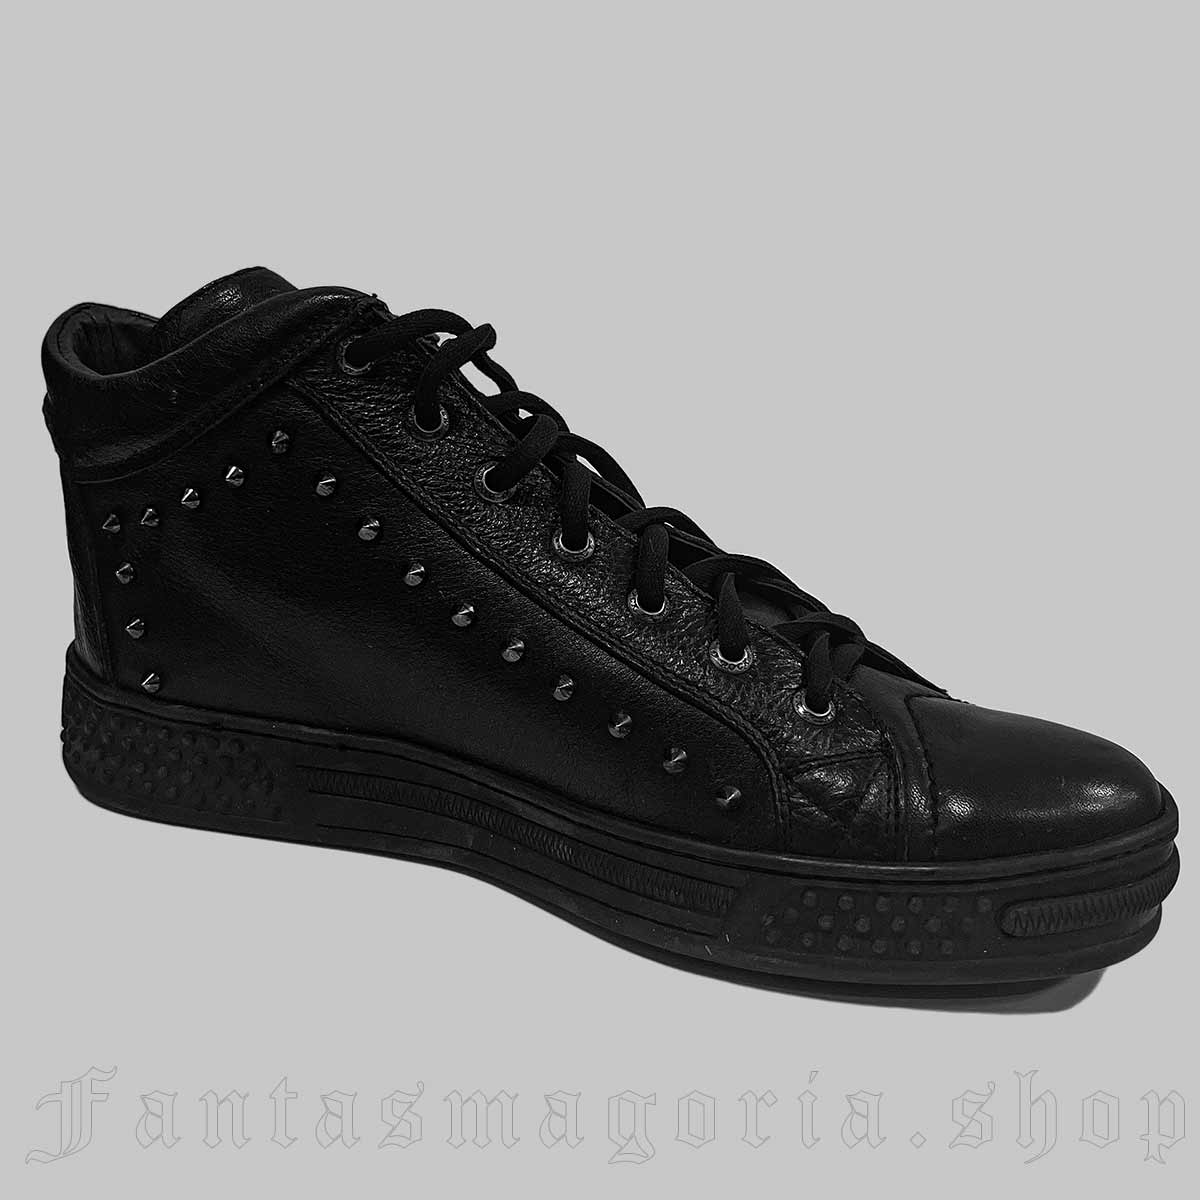 Spiked Black Sneakers RUNS ONE SIZE LARGER - New Rock - {PRODUCT_REFERENCE}-1